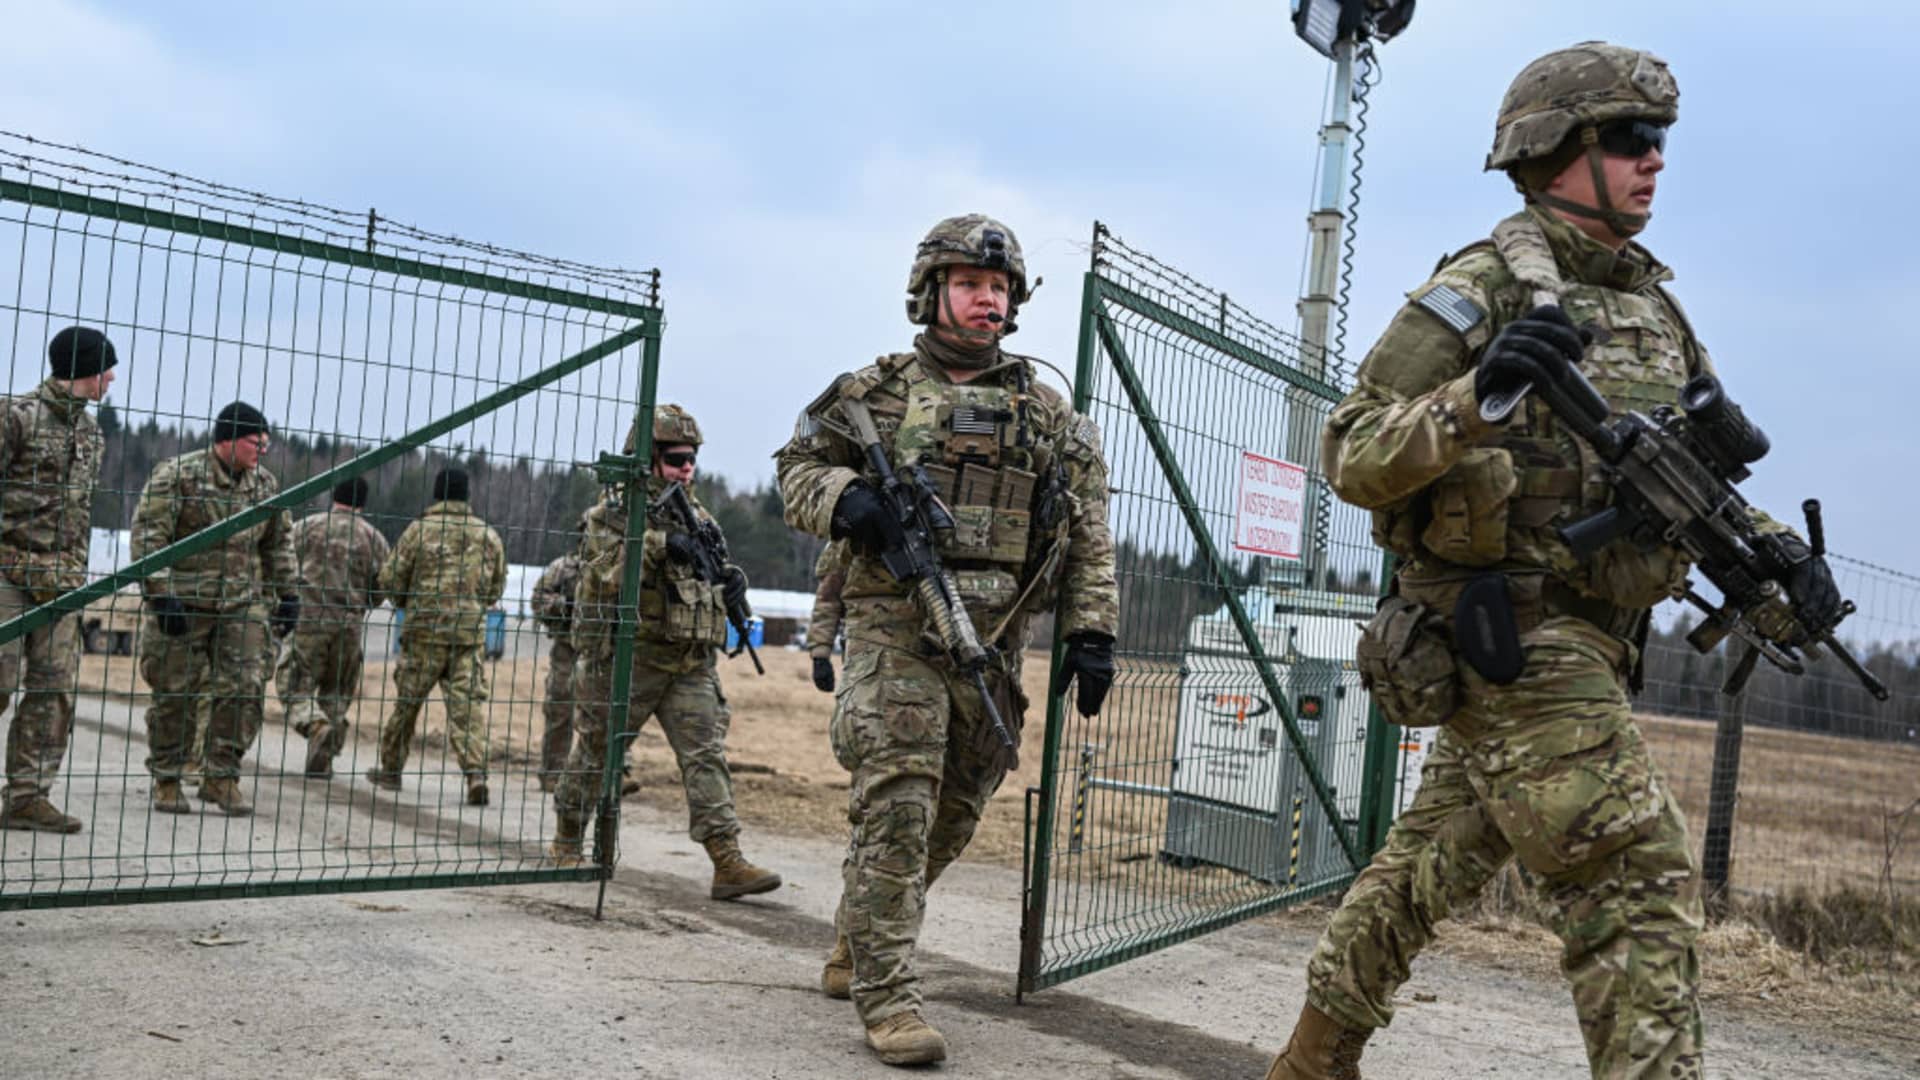 U.S. Army soldiers assigned to the 82nd Airborne carry military equipment as they take part in a exercise outside the operating base at the Arlamow Airport on , 2022 in Wola Korzeniecka, Poland.